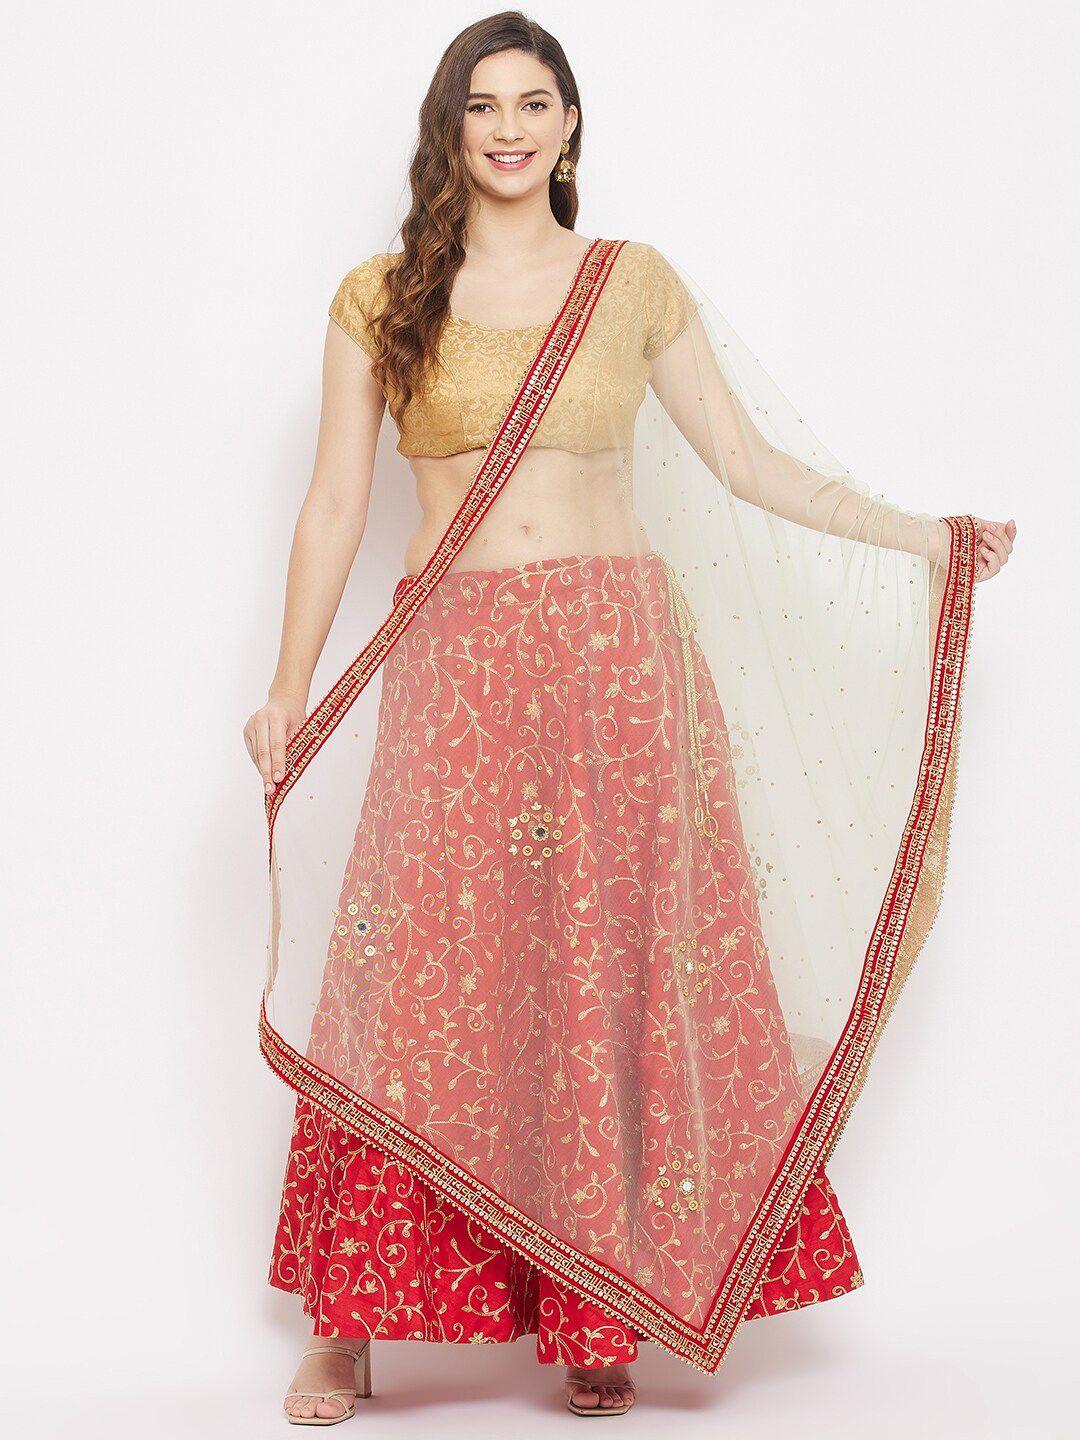 clora creation beige & red ethnic motifs embroidered net dupatta with beads and stones